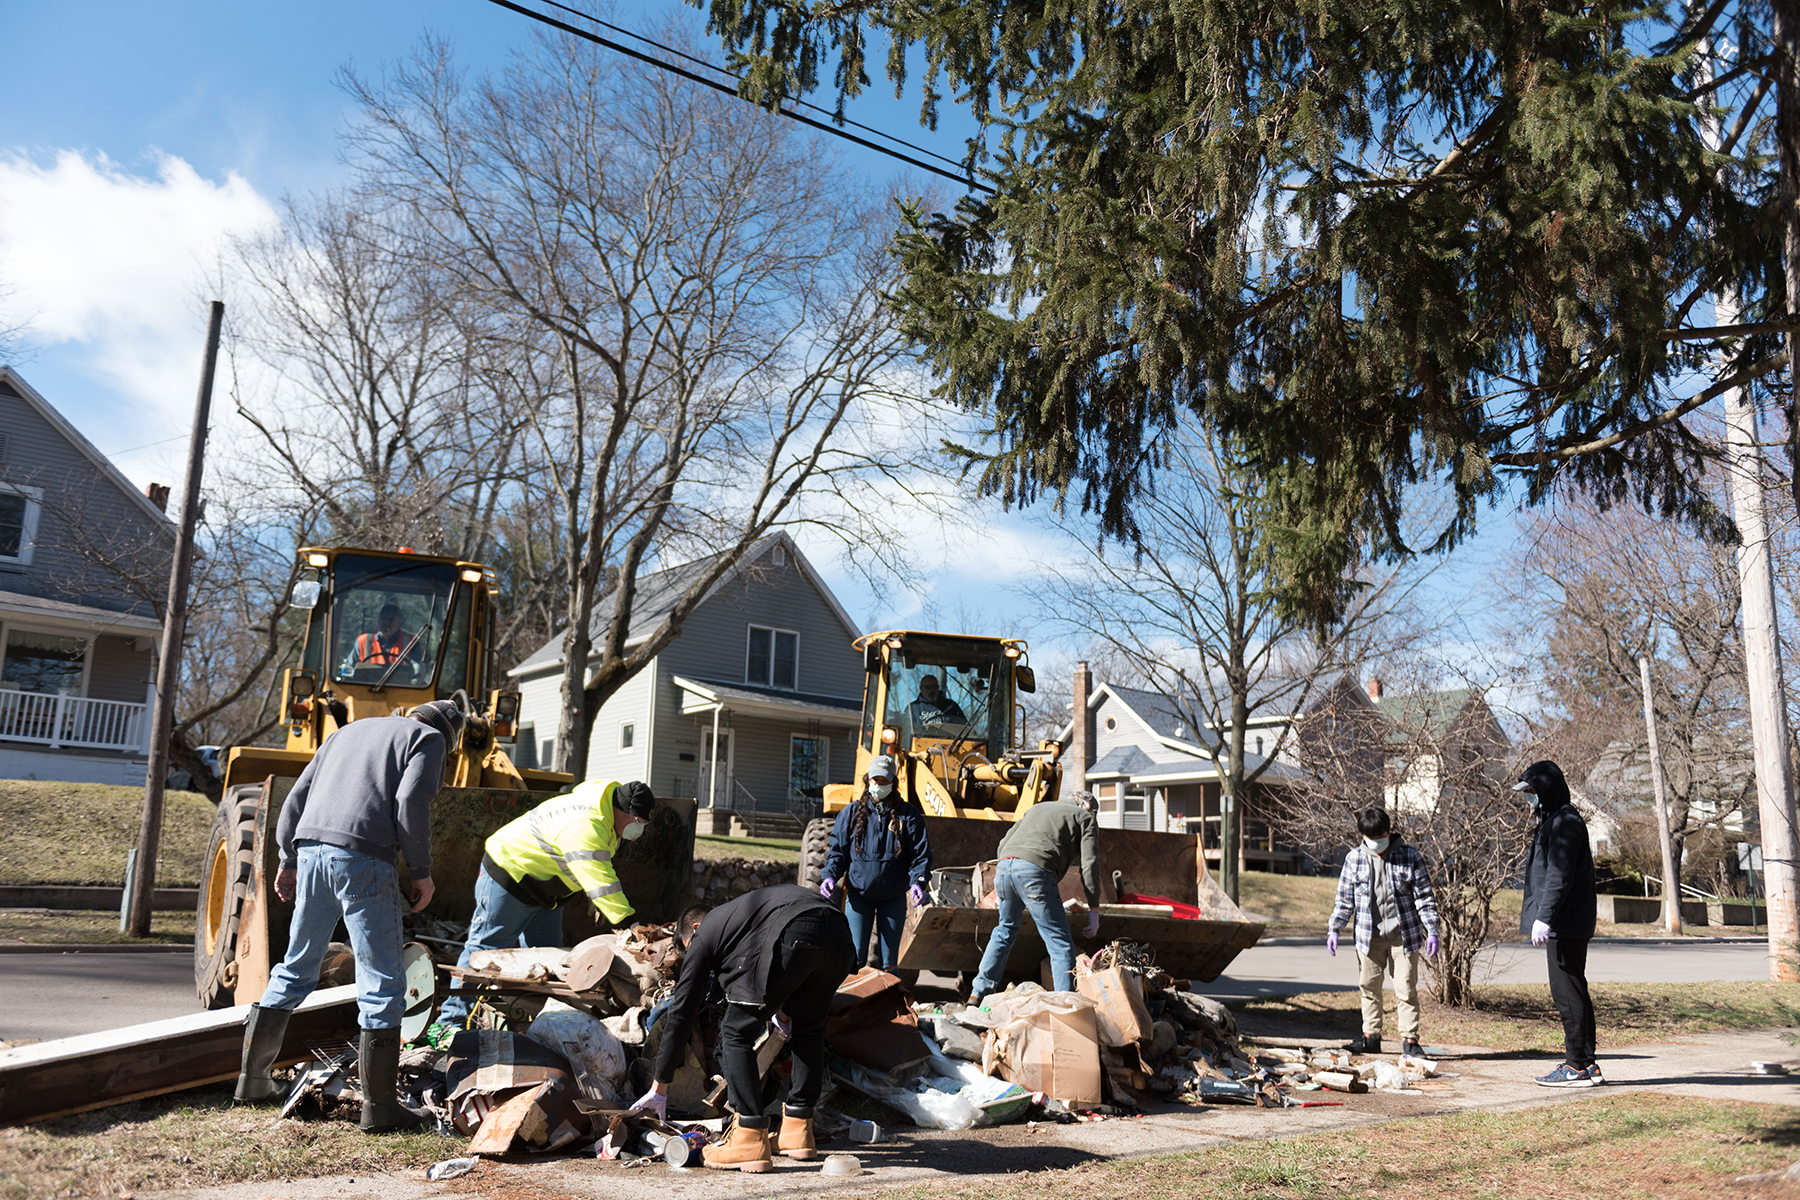 Andrews students, faculty and staff assist with flood clean-up efforts in Niles, Michigan.